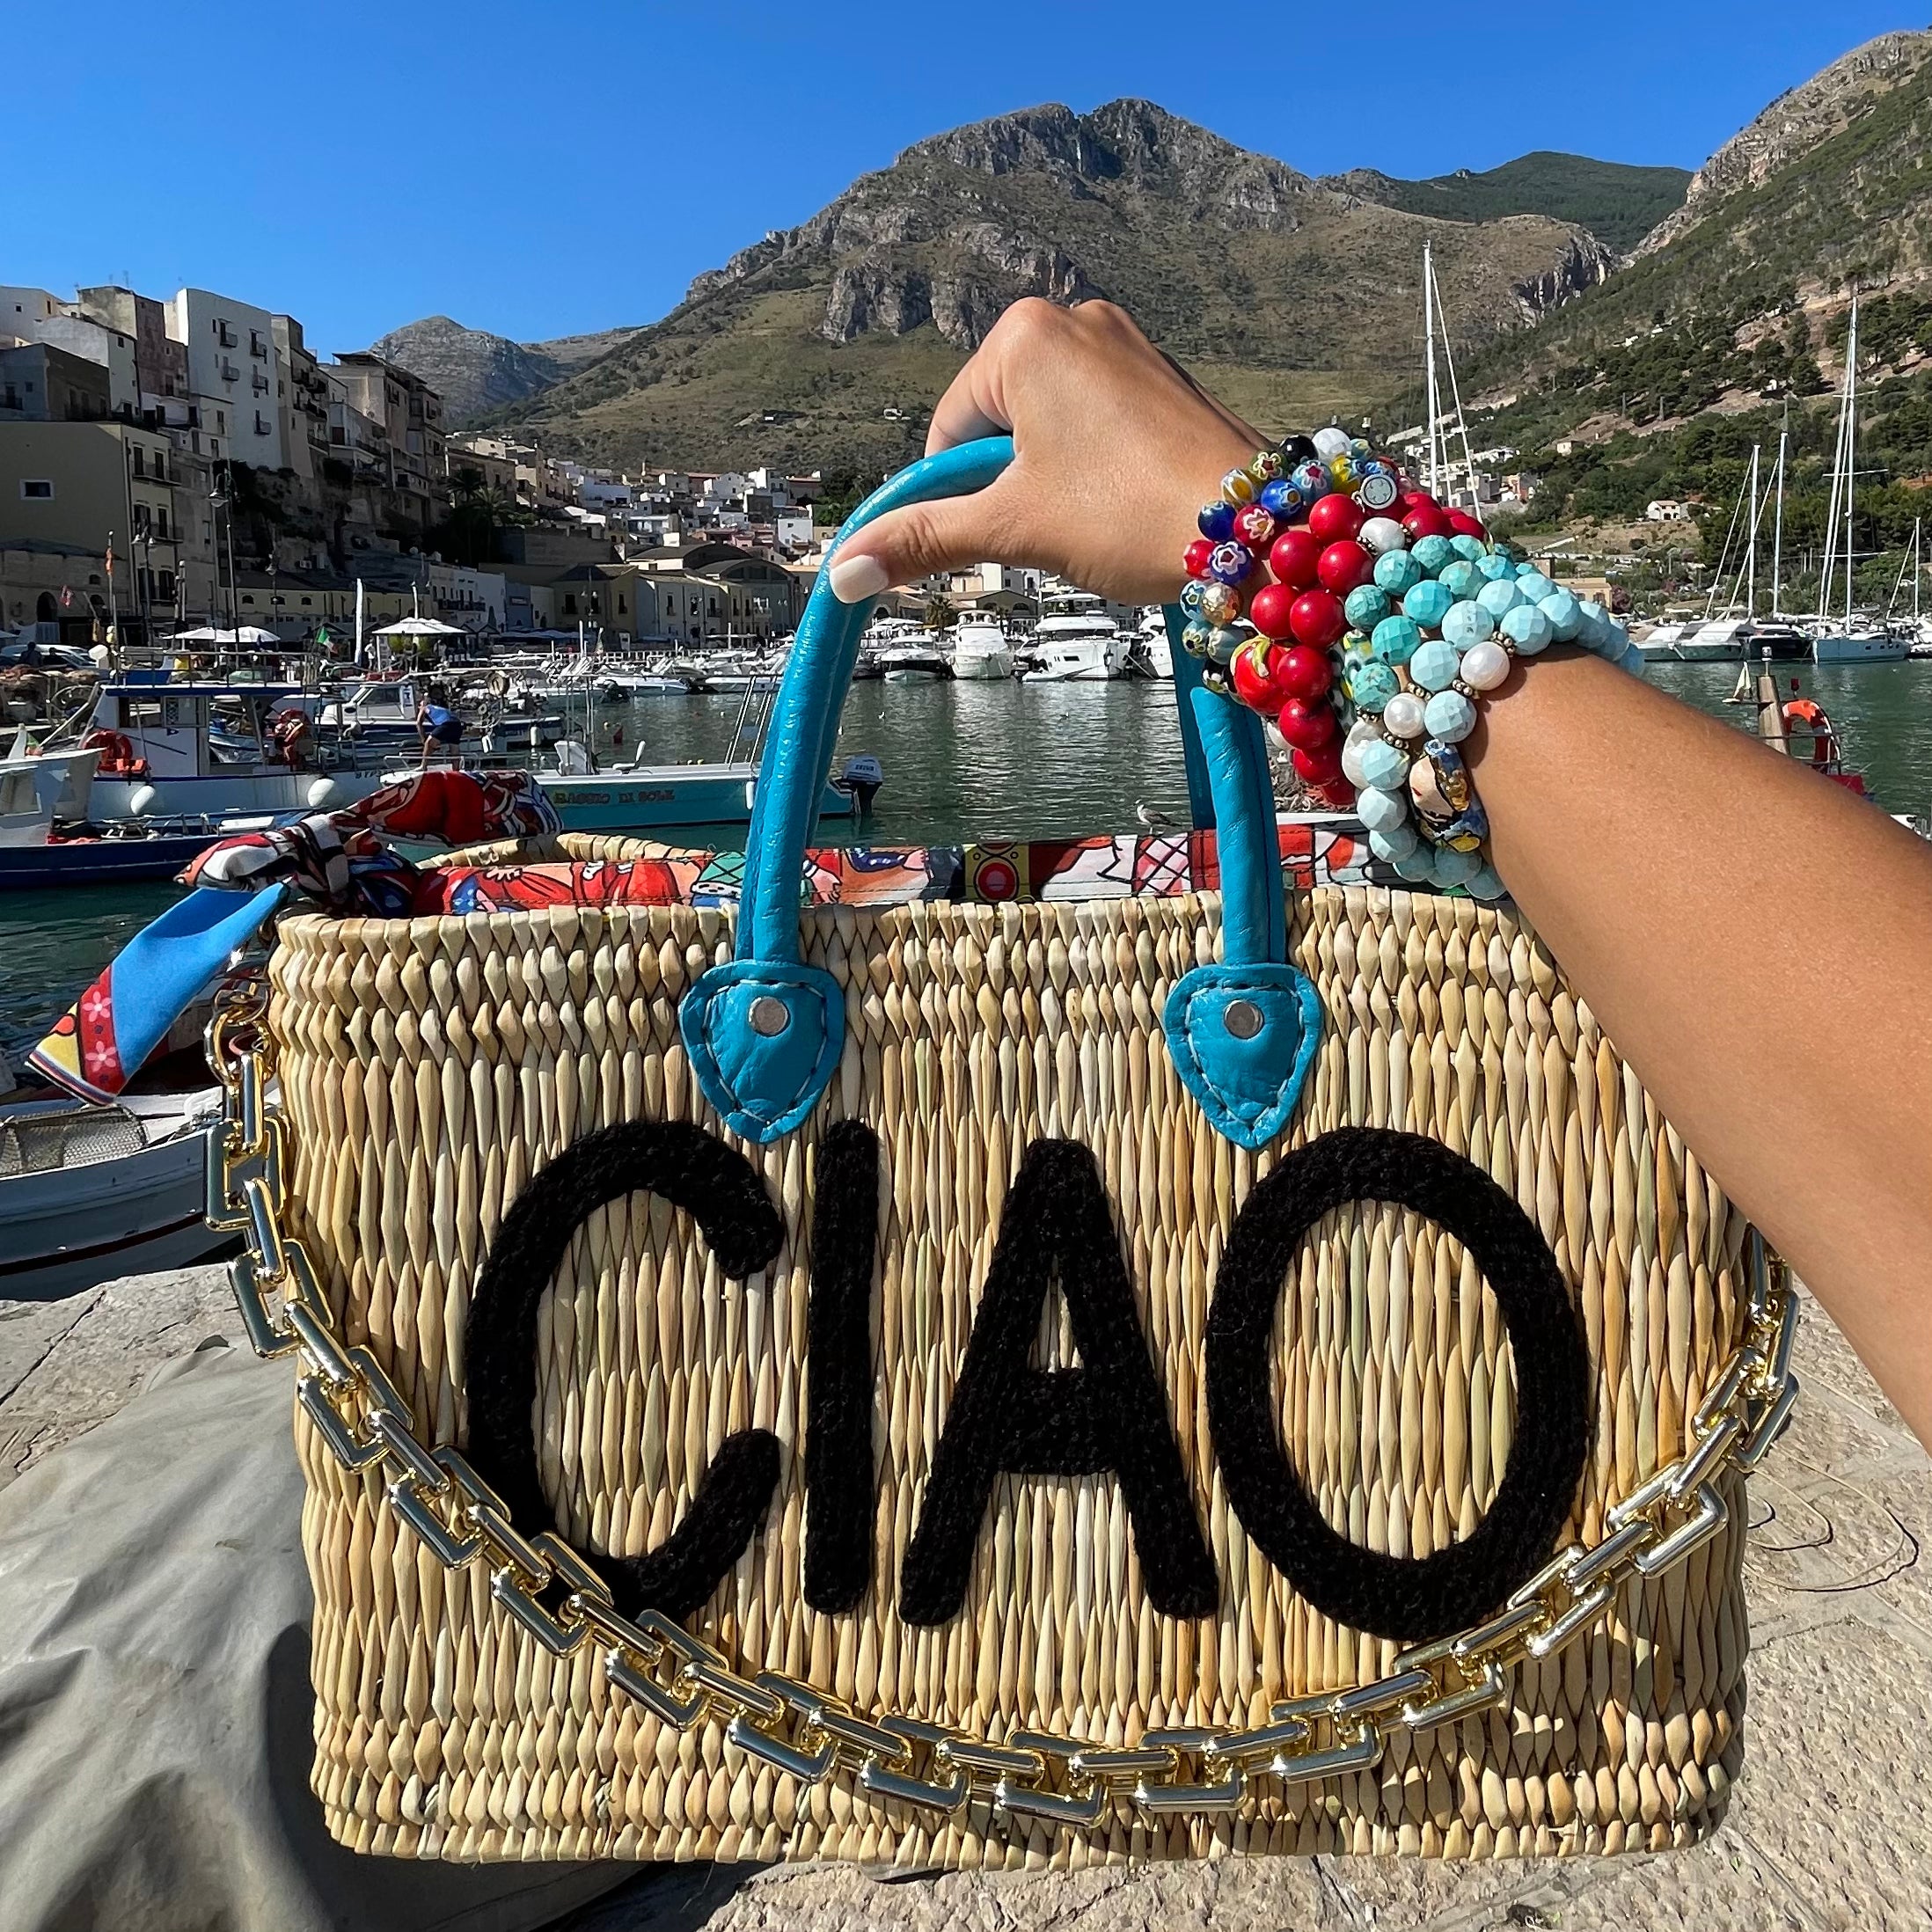 CIAO Turquoise Leather Handle Reed Bag